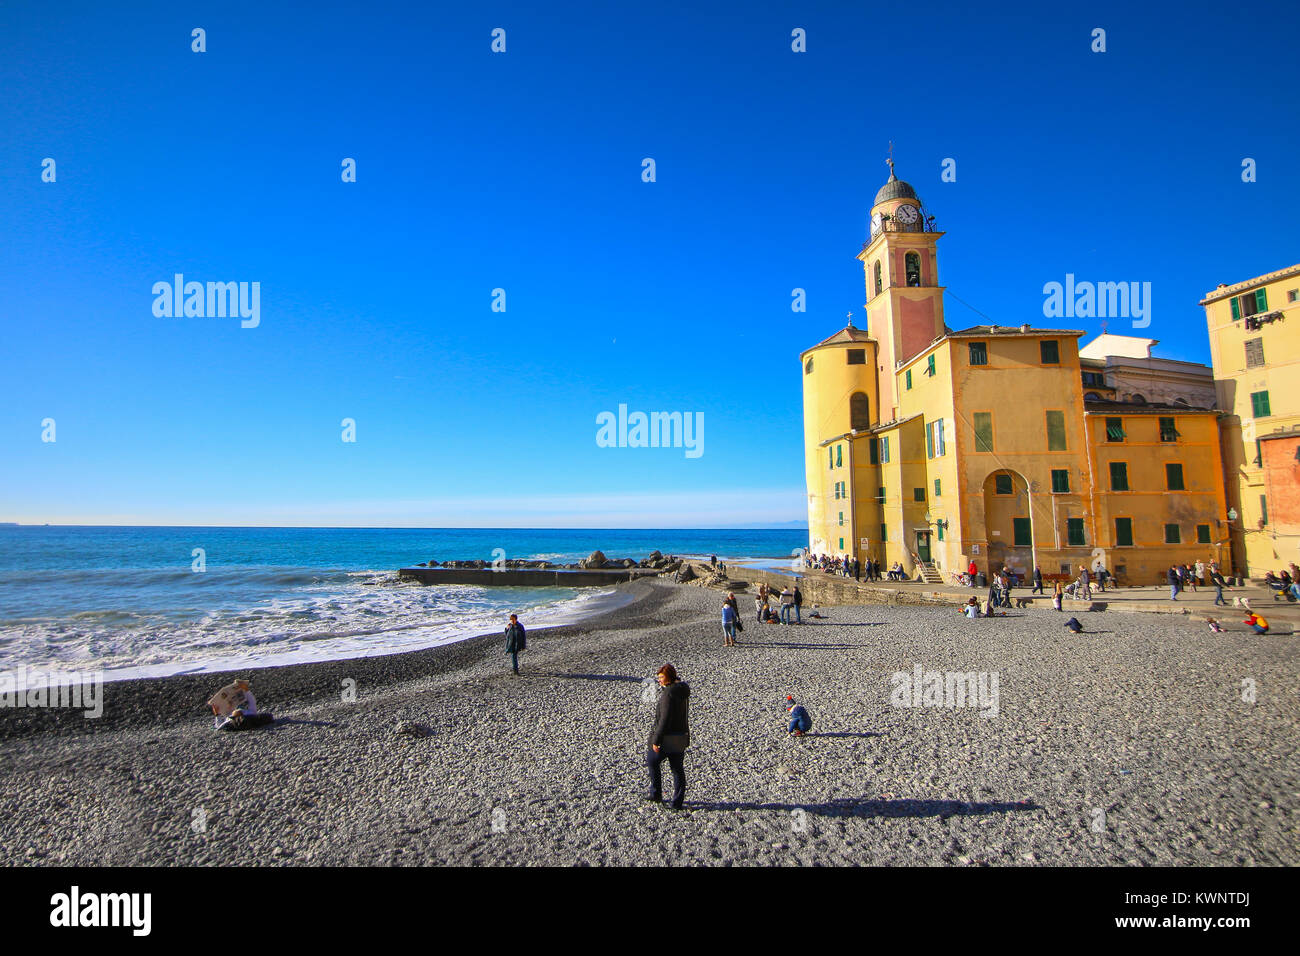 Camogli, Italy - People relaxing on the beach and the basilica Santa Maria Assunta in the background Stock Photo